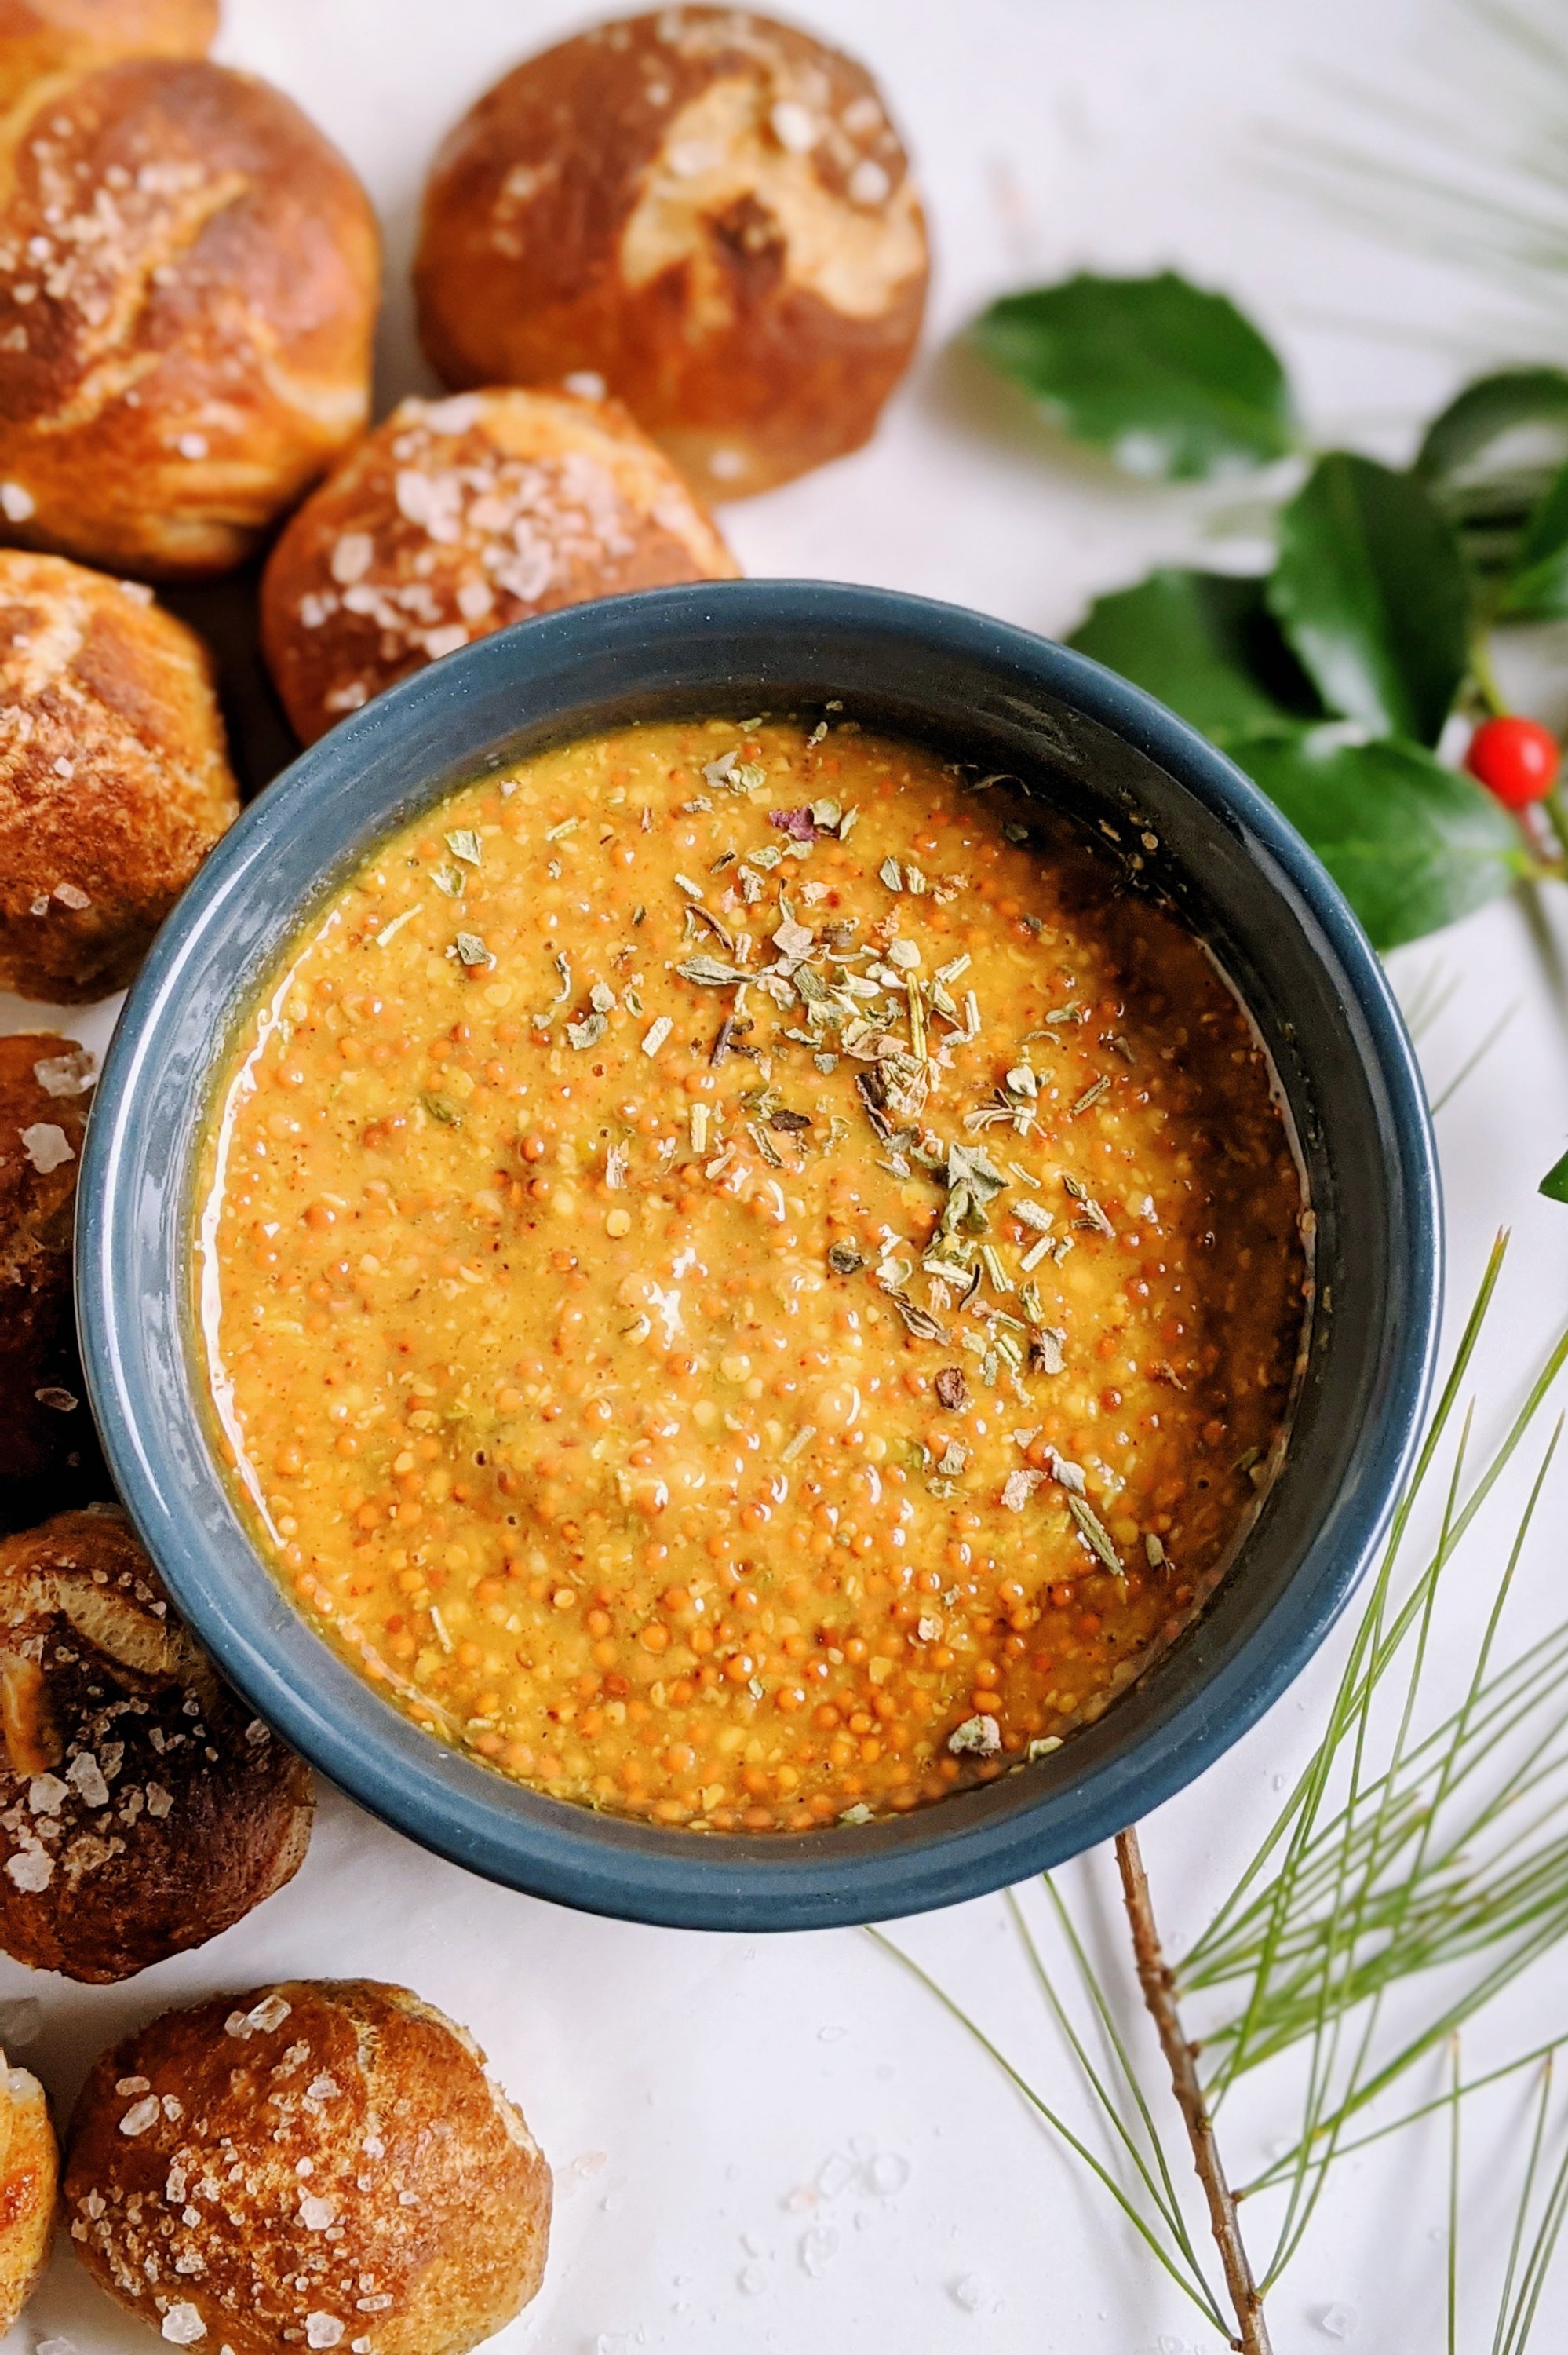 sweet herb mustard dipping sauce with whole grain mustard yellow mustard maple syrup all natrual sweetener and herbs de provance thyme rosemary savory sage lavender